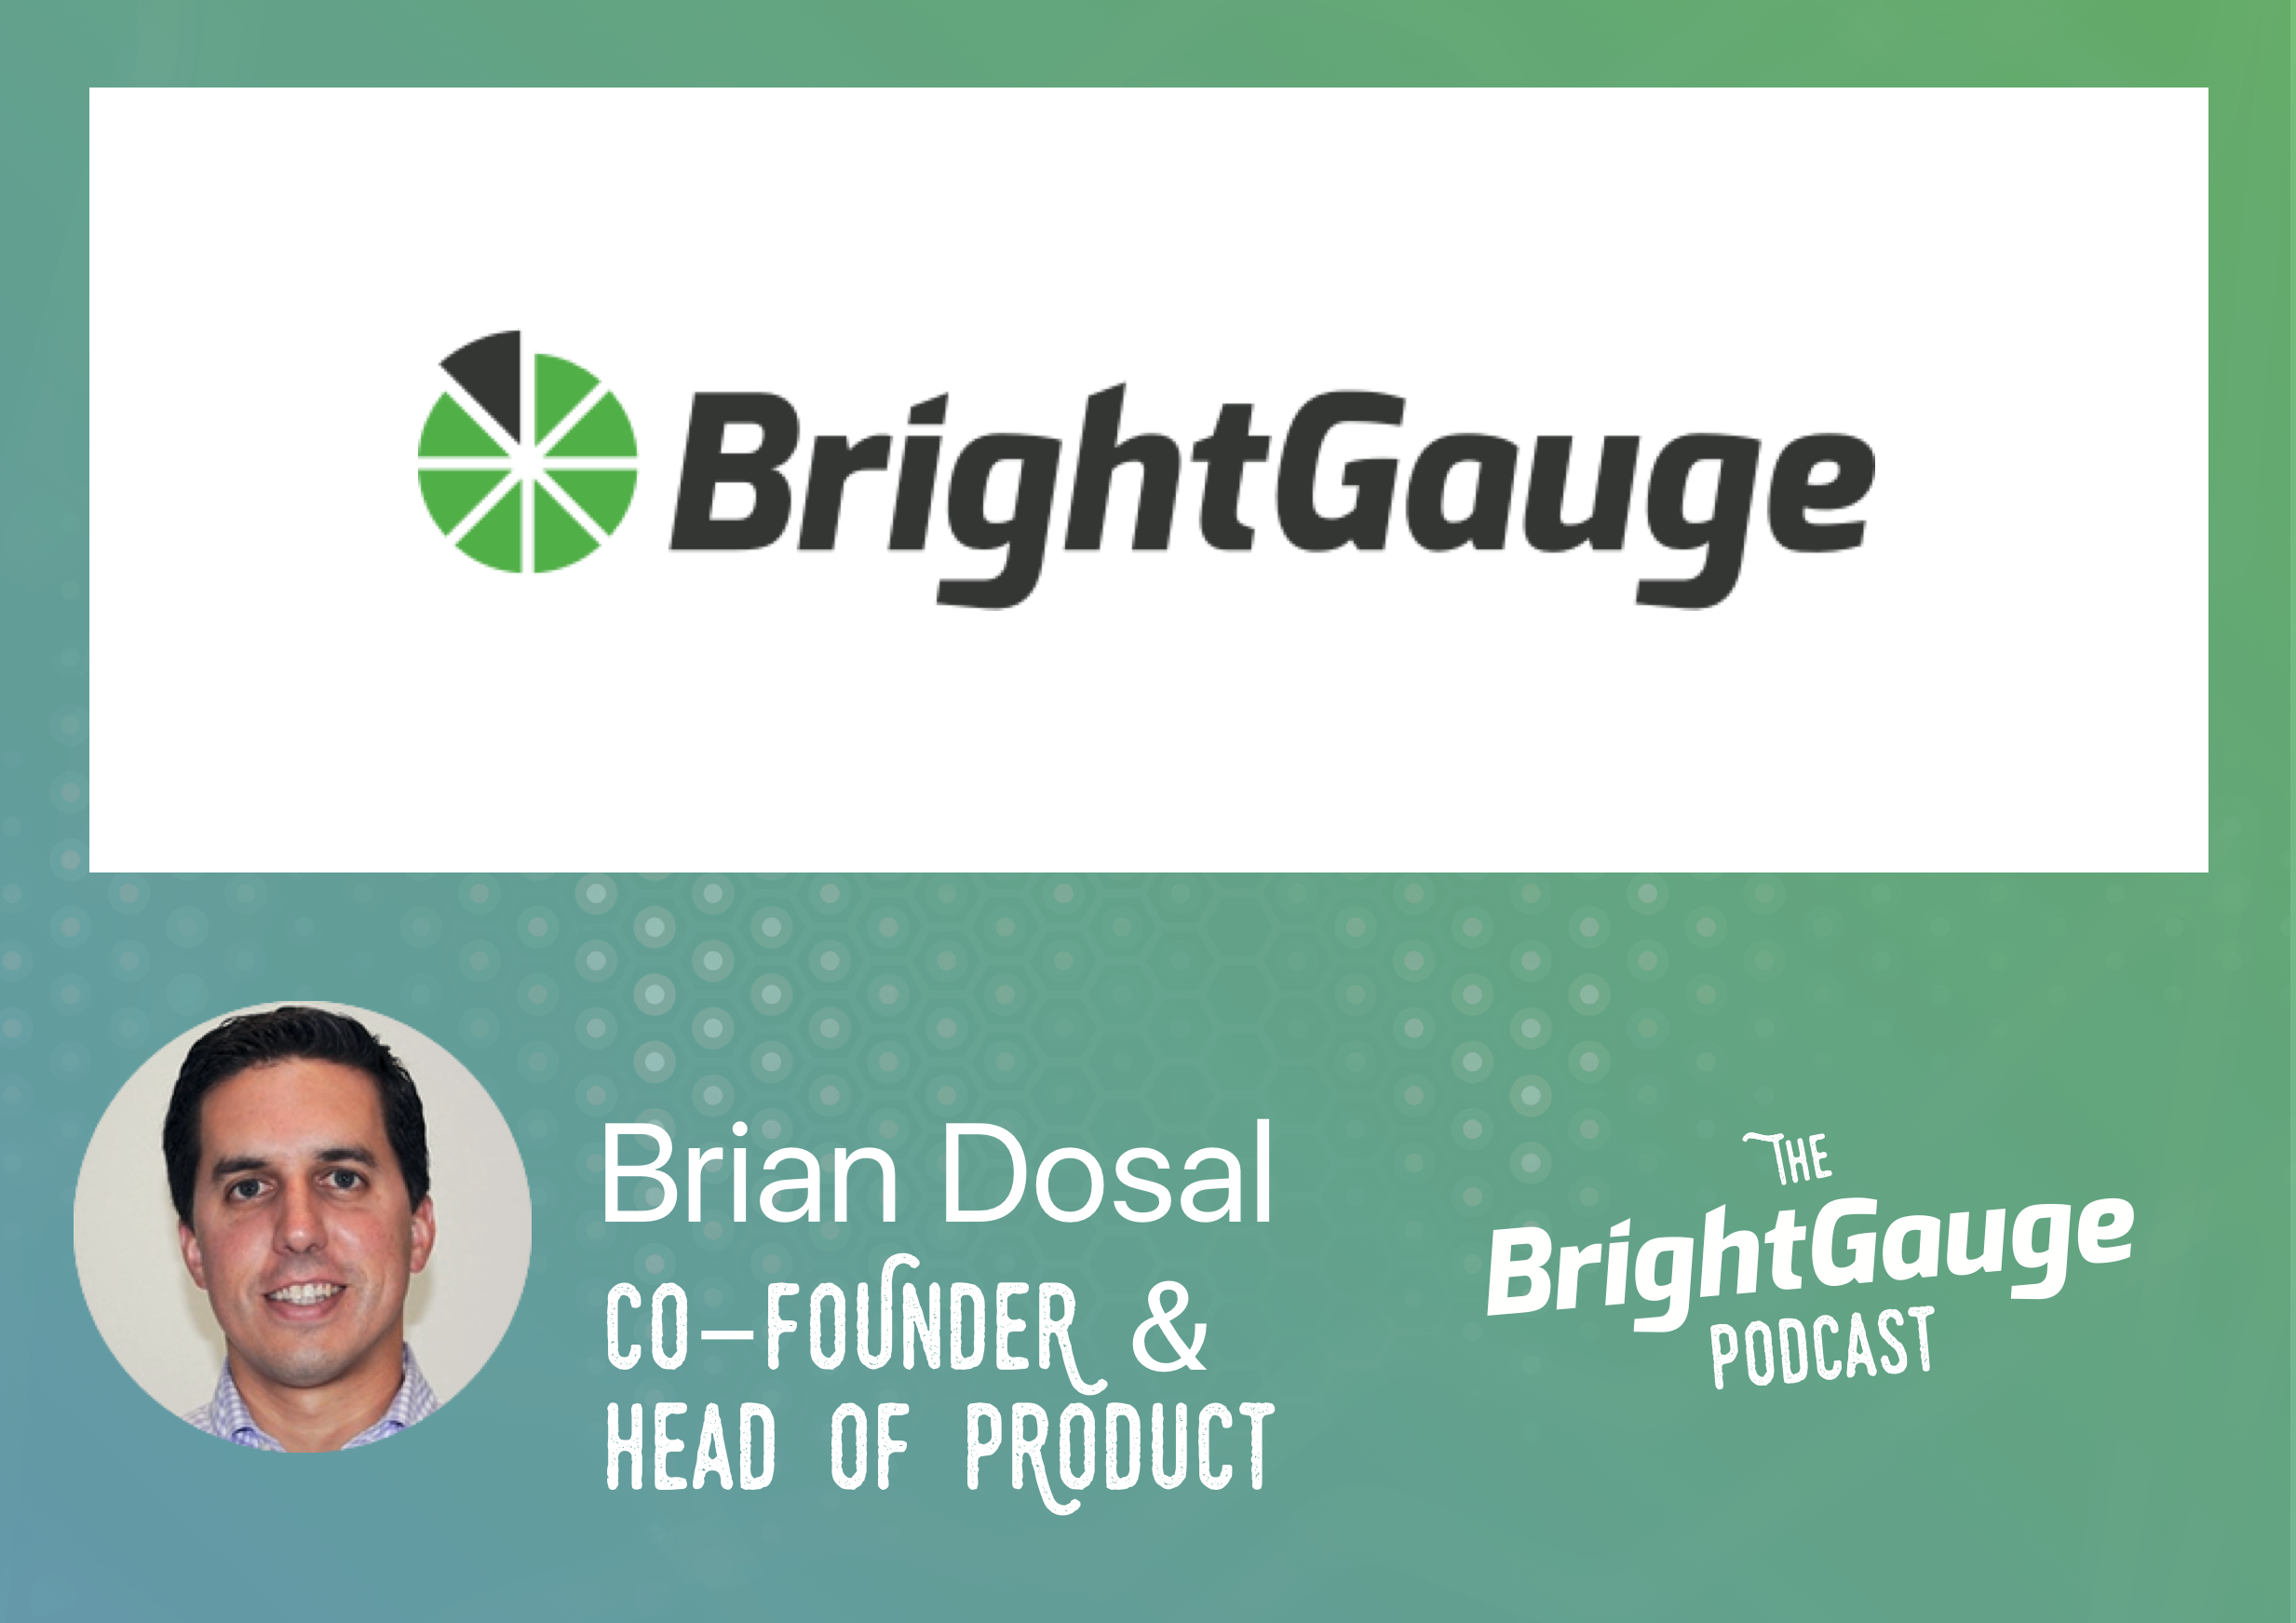 [Podcast] Building BrightGauge, featuring Brian Dosal